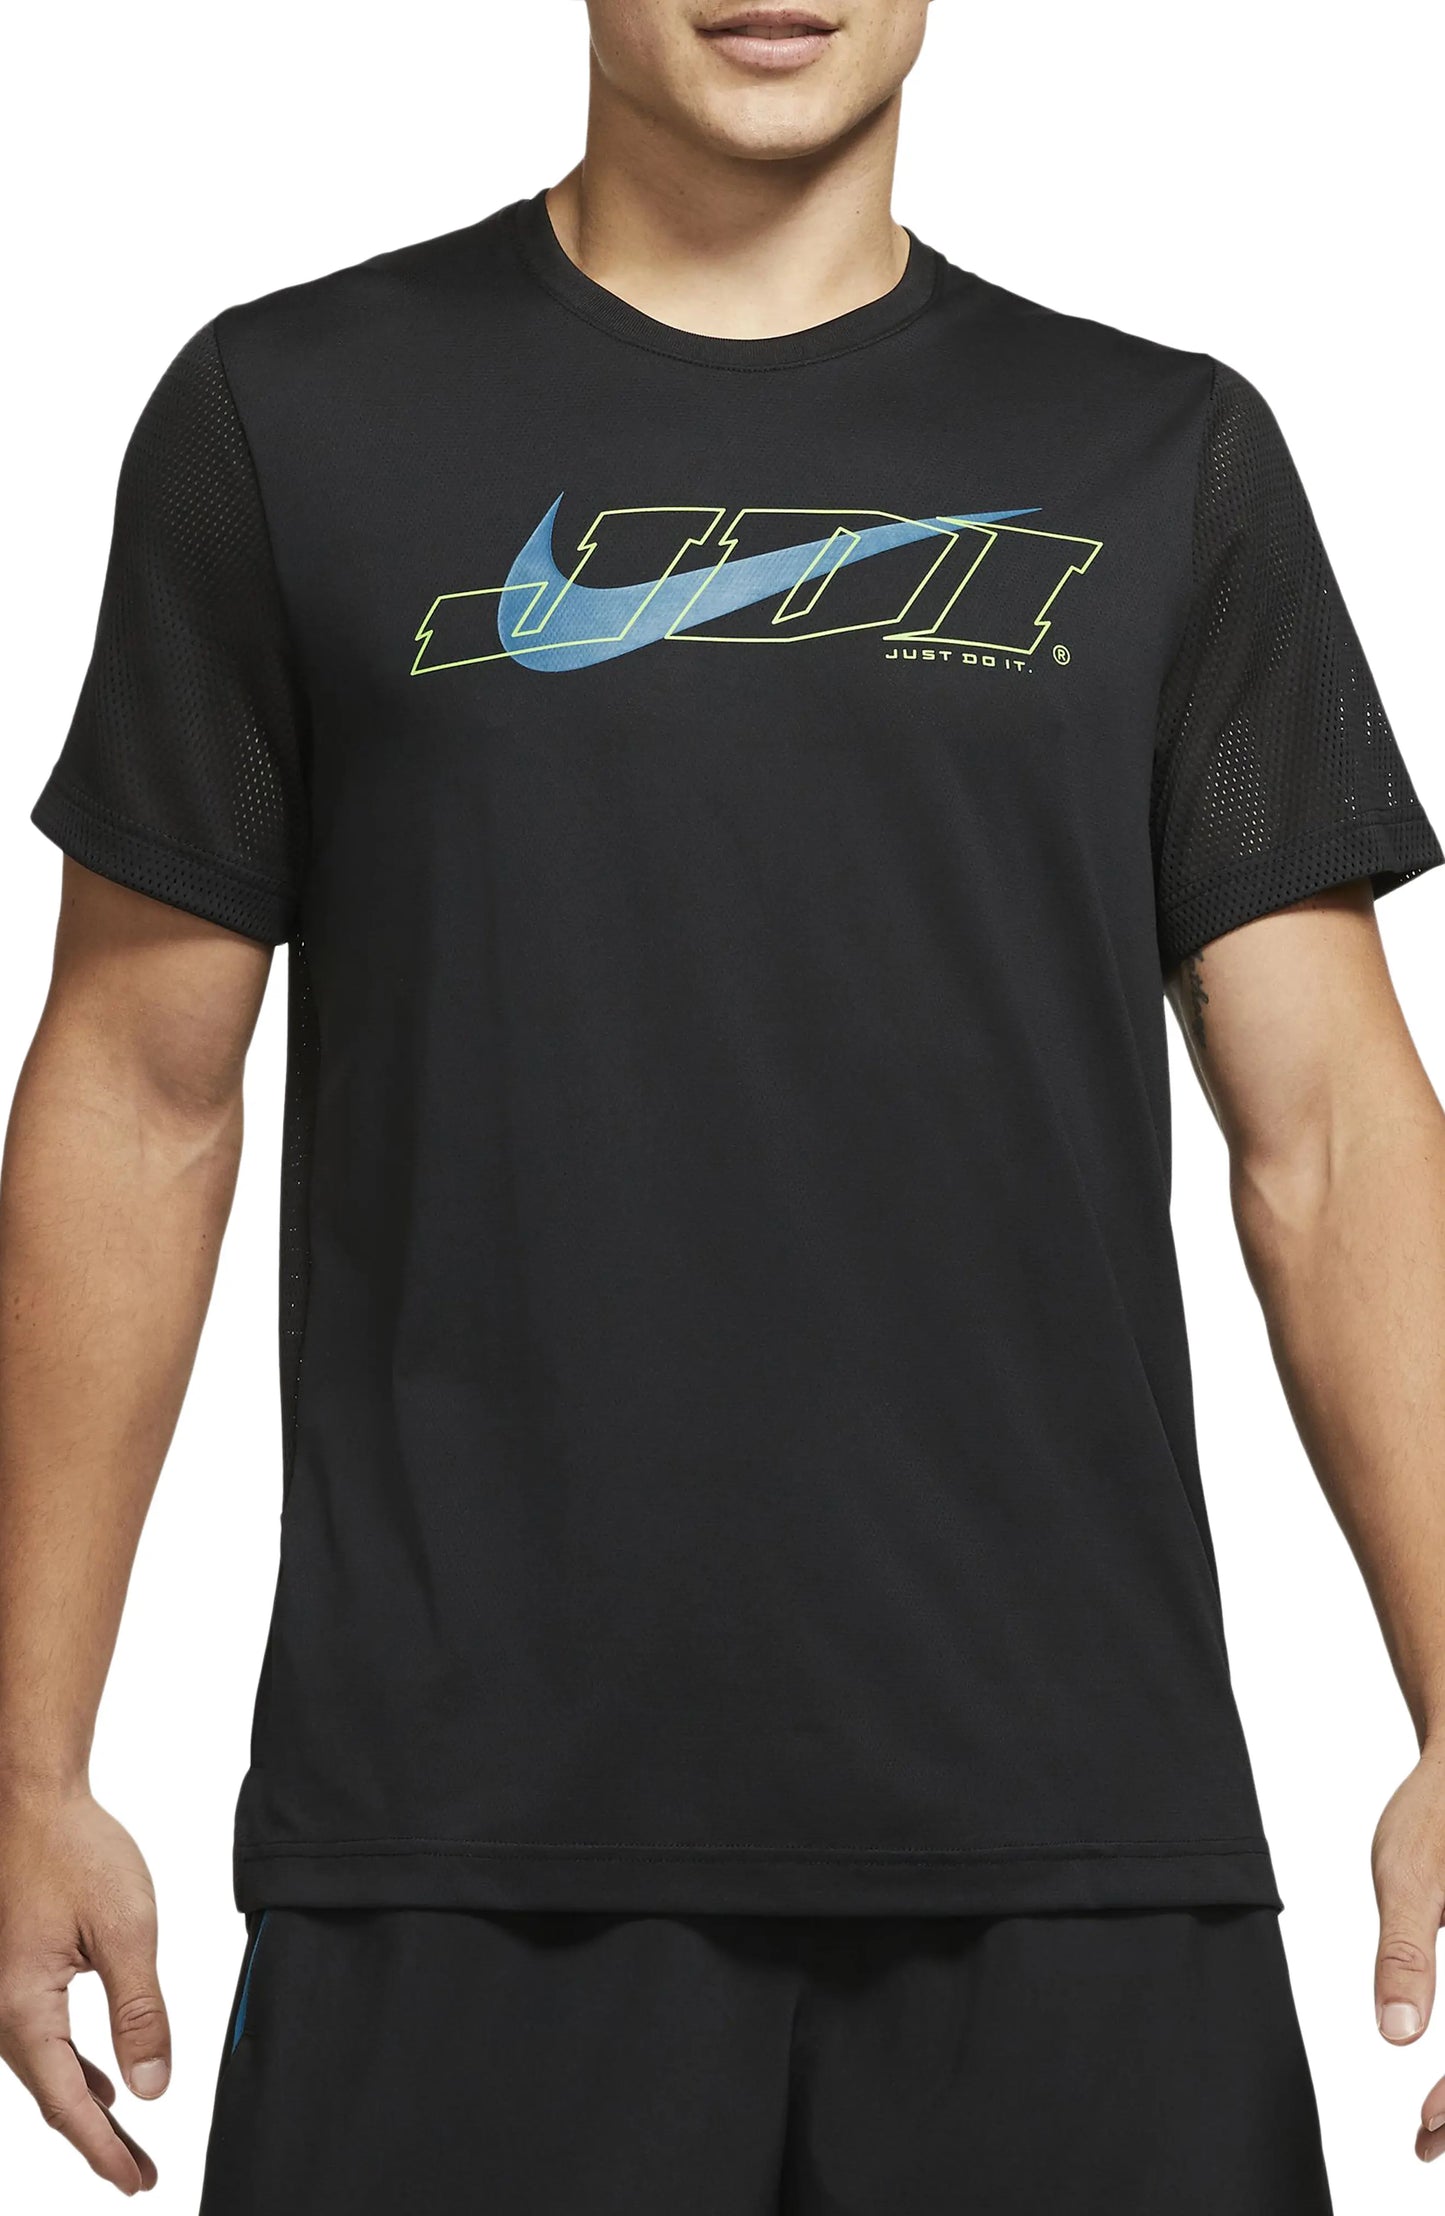 NIKE Sport Clash Performance Graphic Tee in Black/green Abyss at Nordstrom, Size X-Large Regular